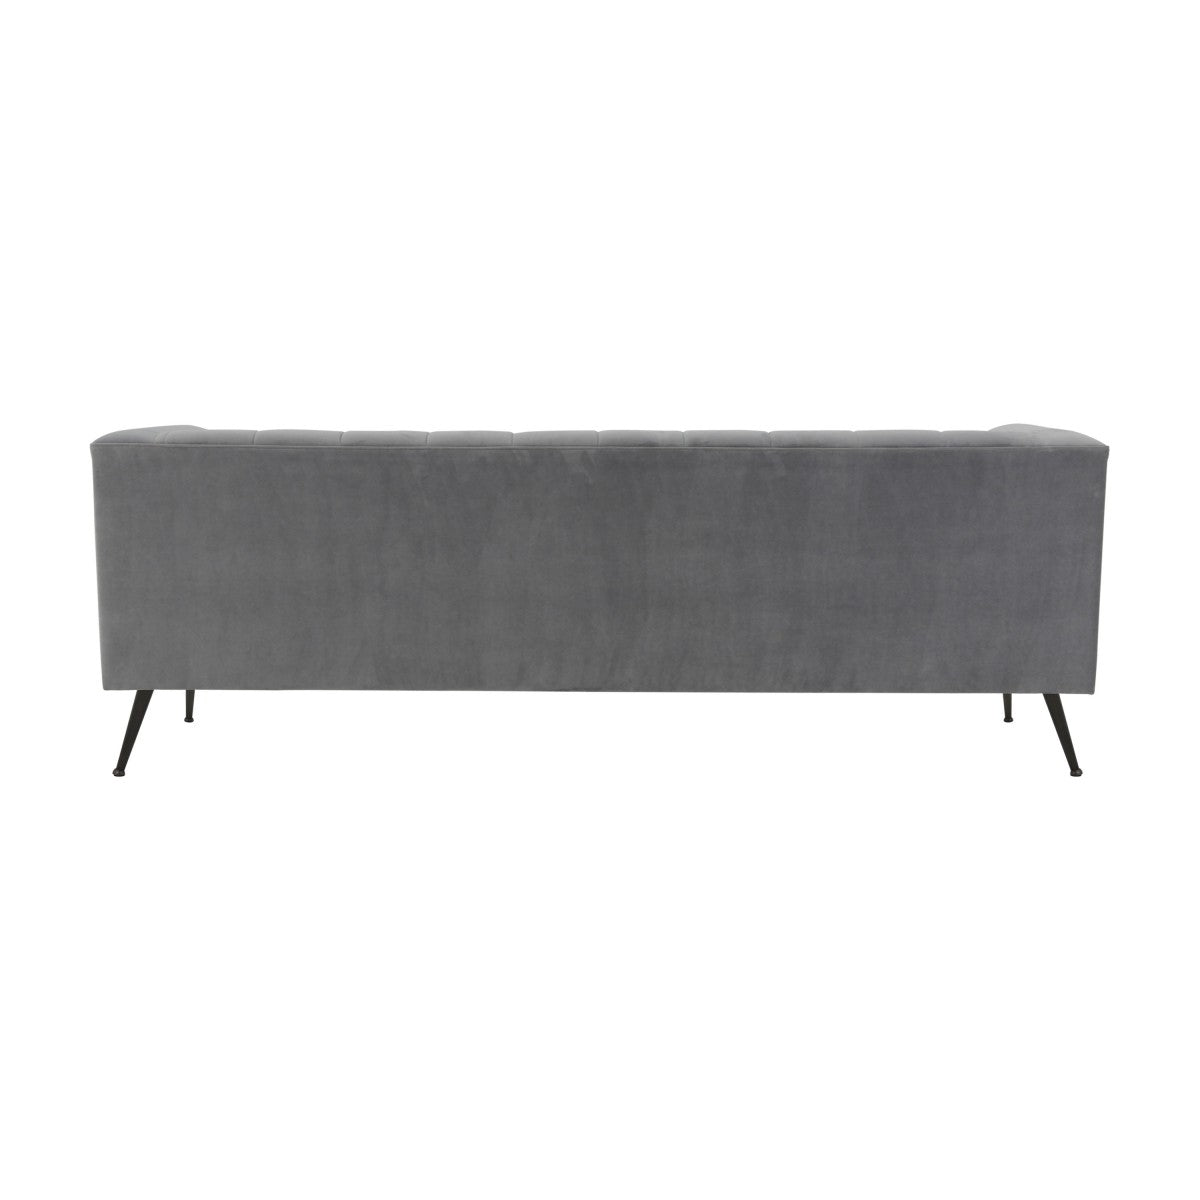 Nubes Bespoke Upholstered Modern Style Four Seater Sofa MS625F Custom Made To Order